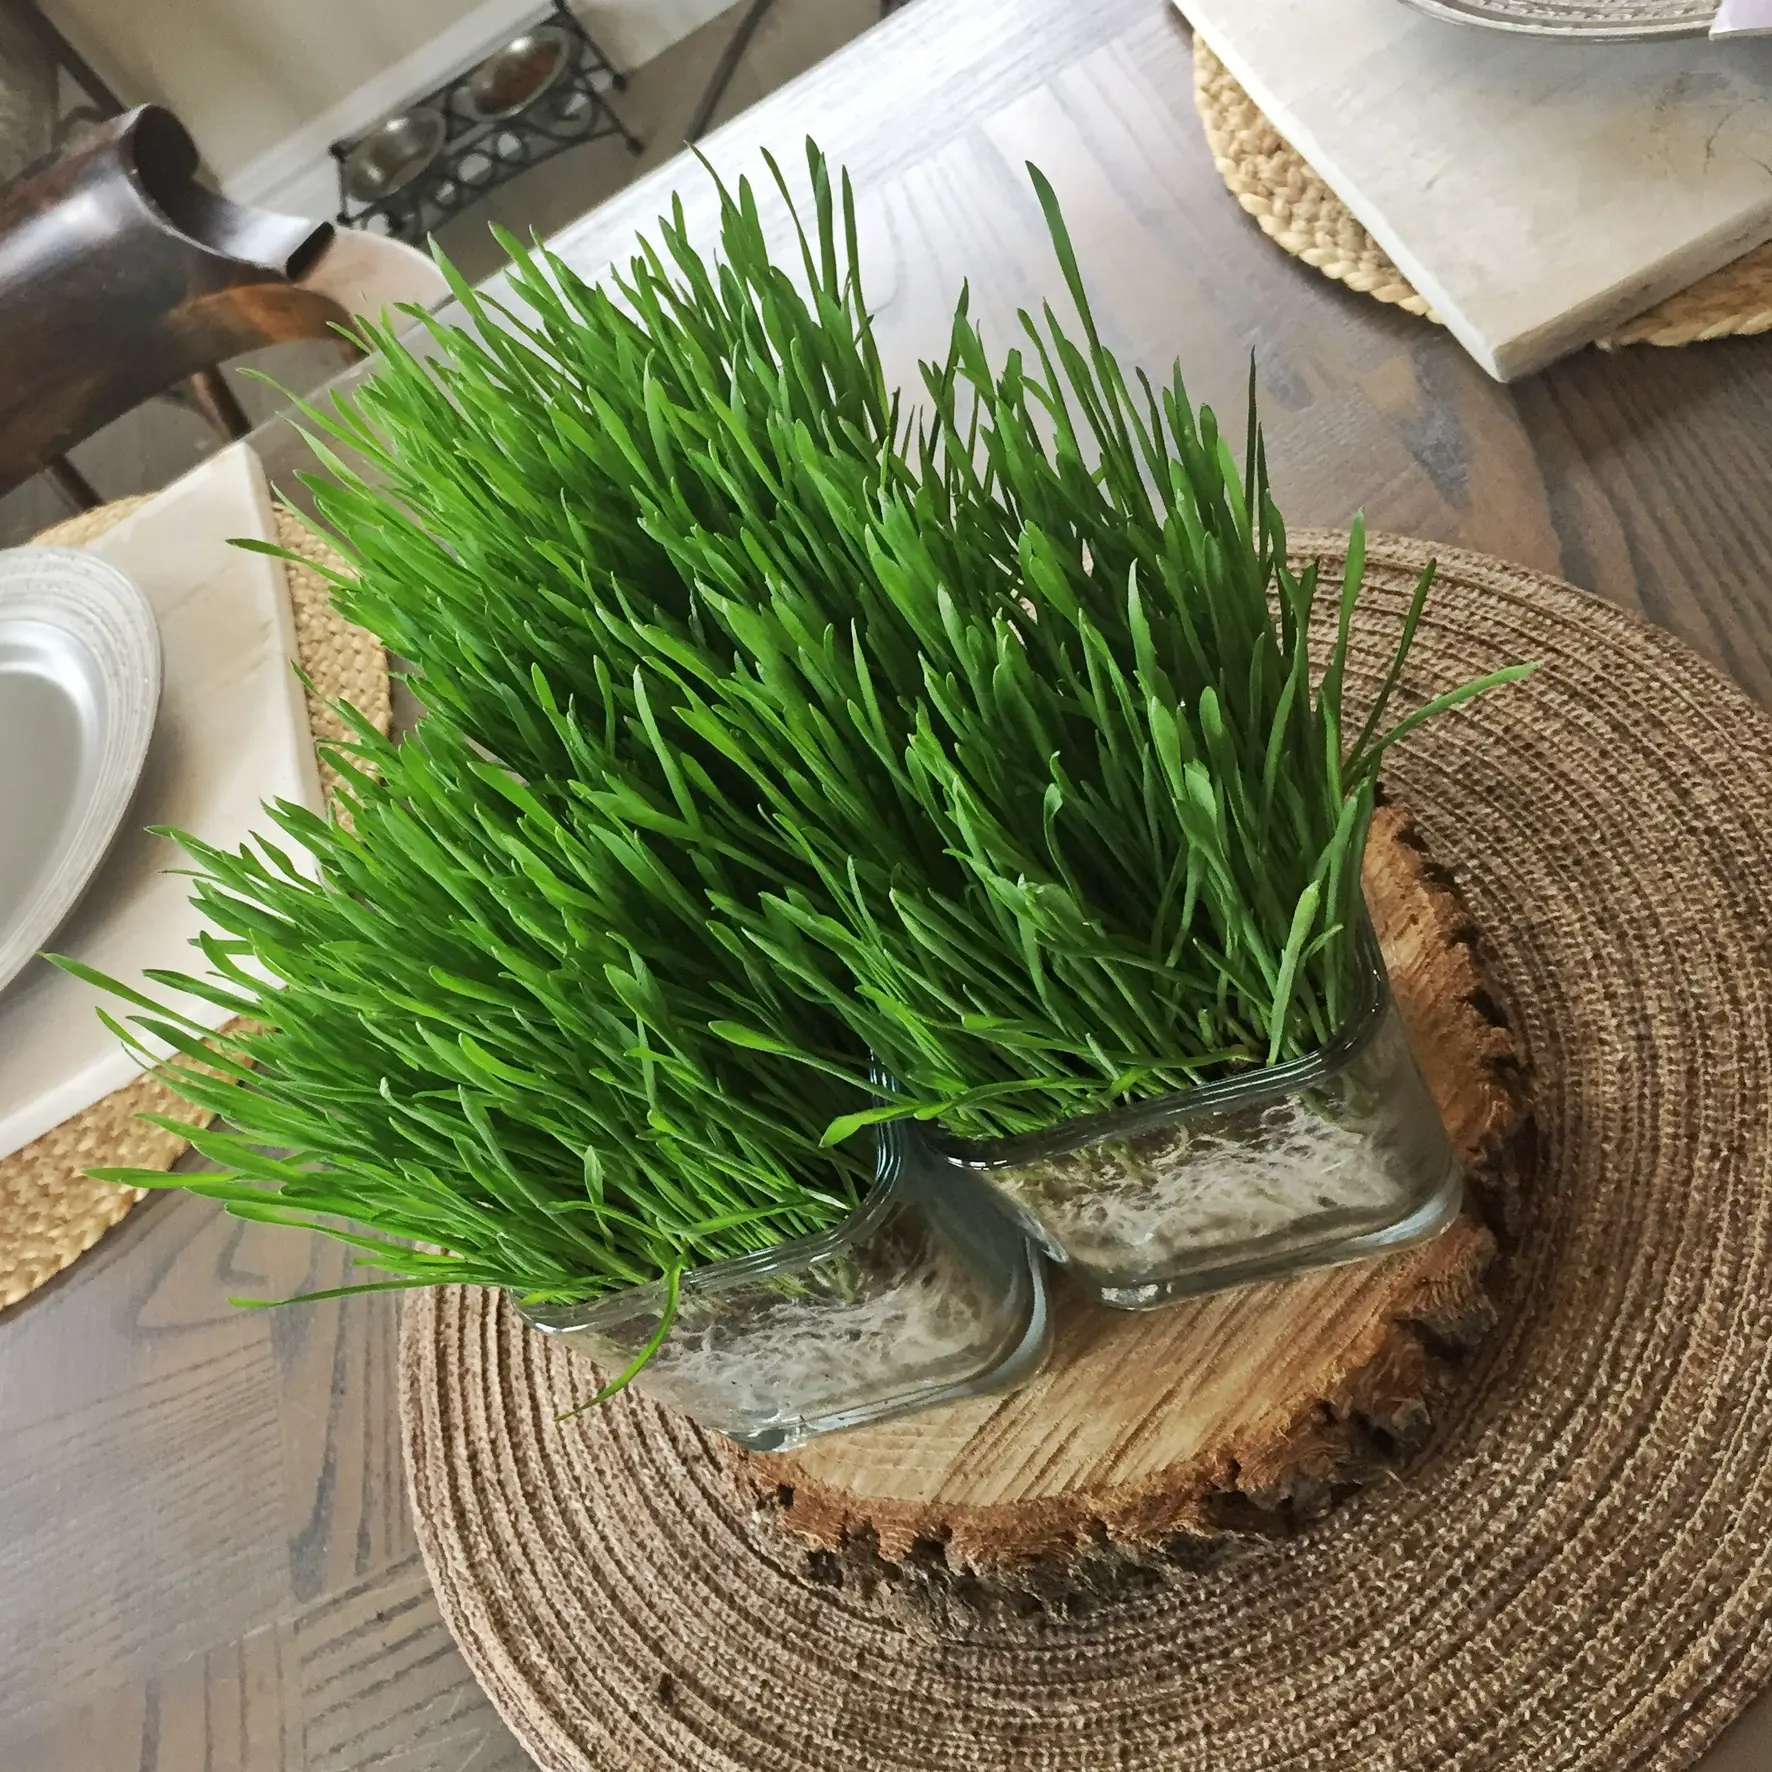 How to make a spring tablescape using wheat grass